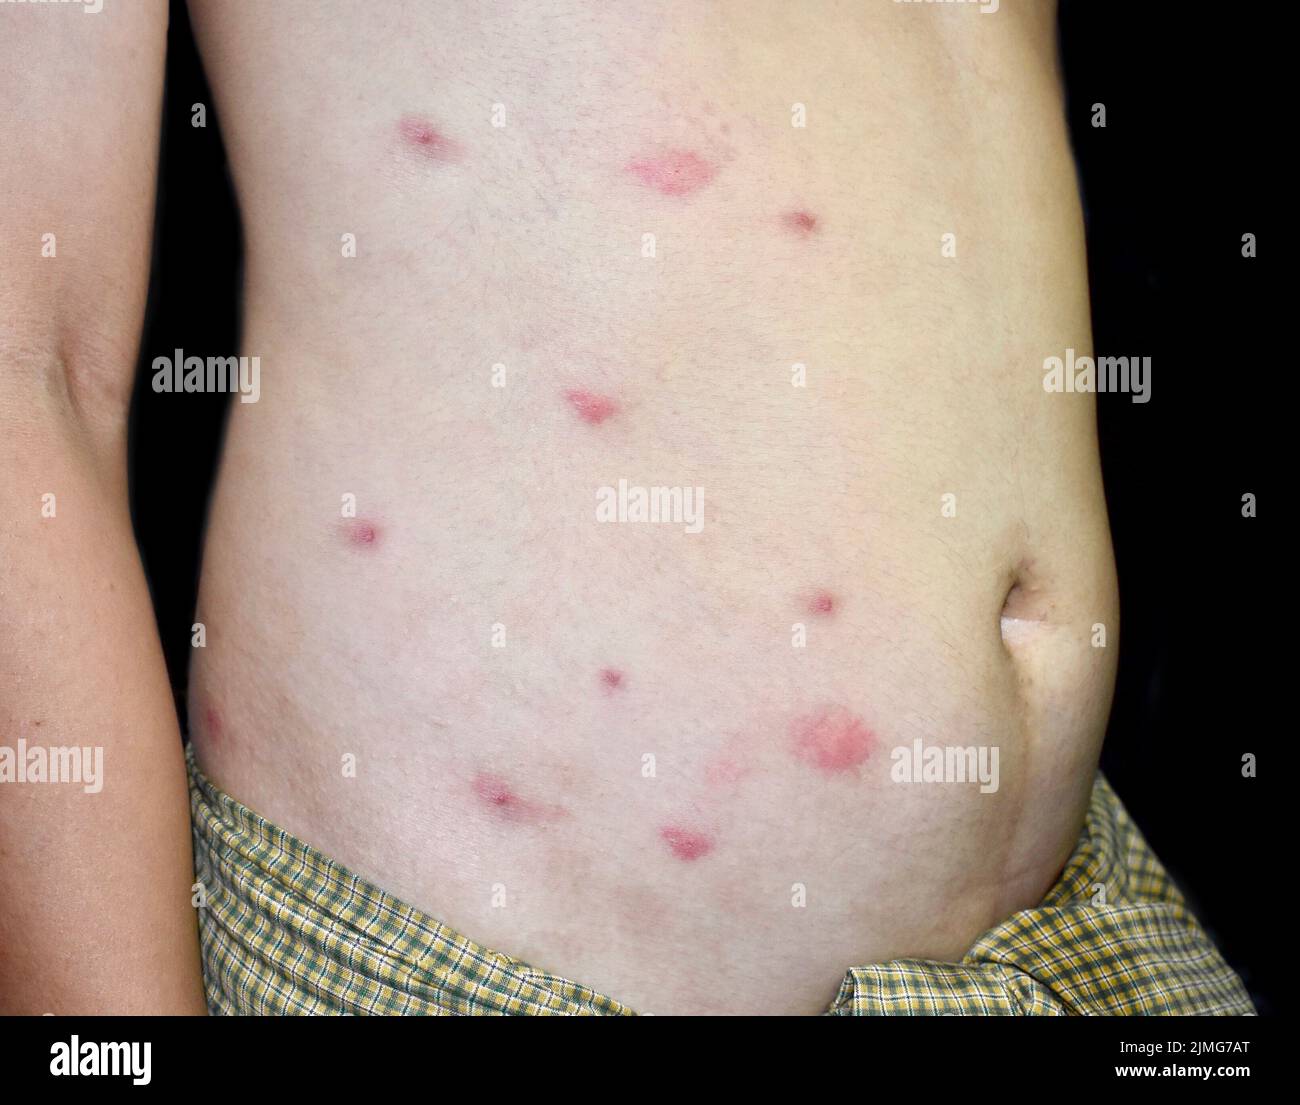 Multiple itchy mosquito or insect bite wheals; red spots on trunk of Southeast Asian, Chinese adult young man. Isolated on black background. Stock Photo